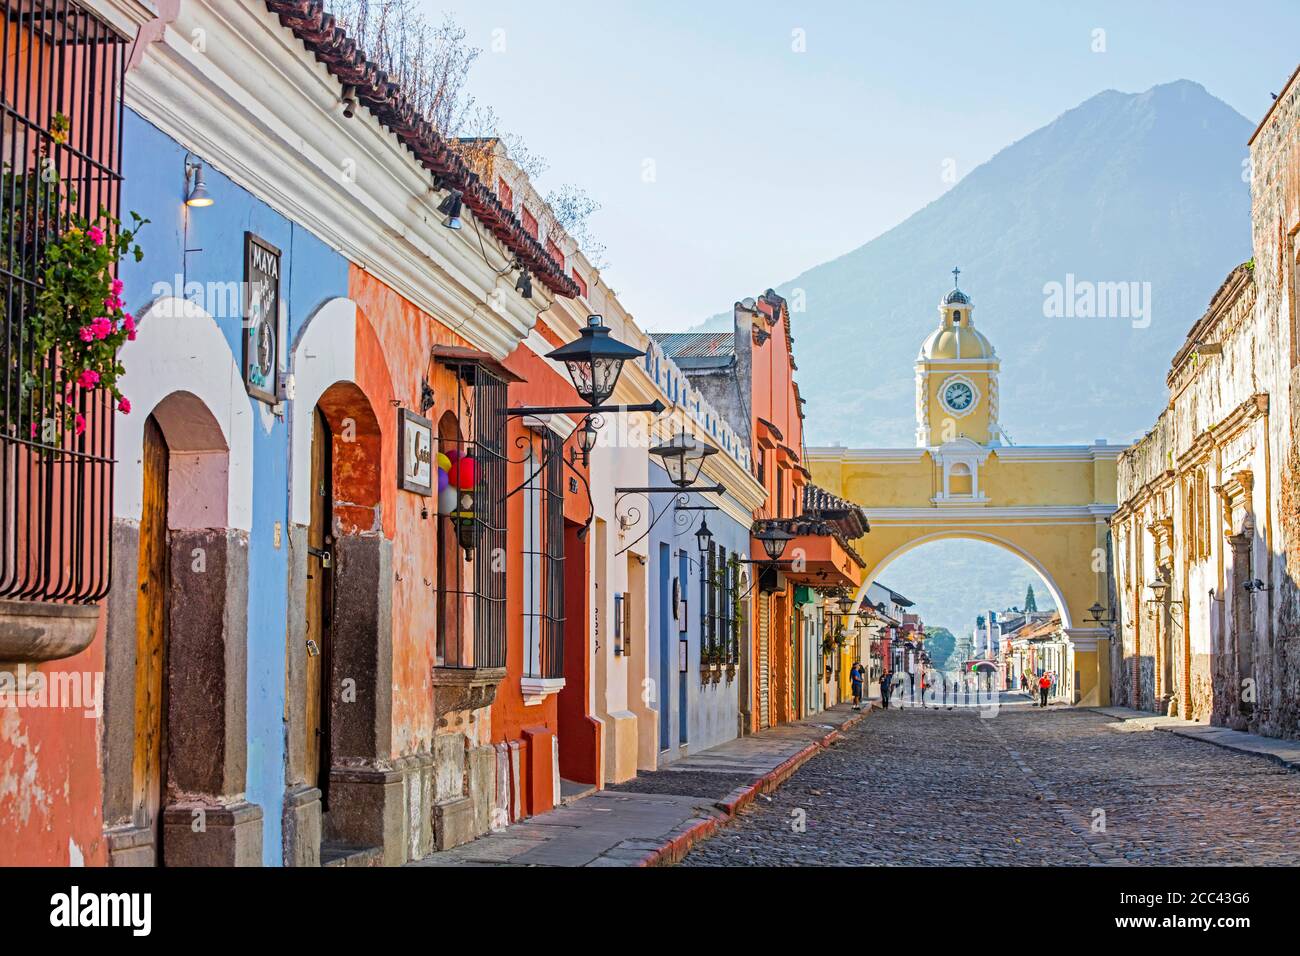 Colourful colonial houses and the 17th century Arco de Santa Catalina Arch in the city Antigua Guatemala, Sacatepéquez Department, Guatemala Stock Photo